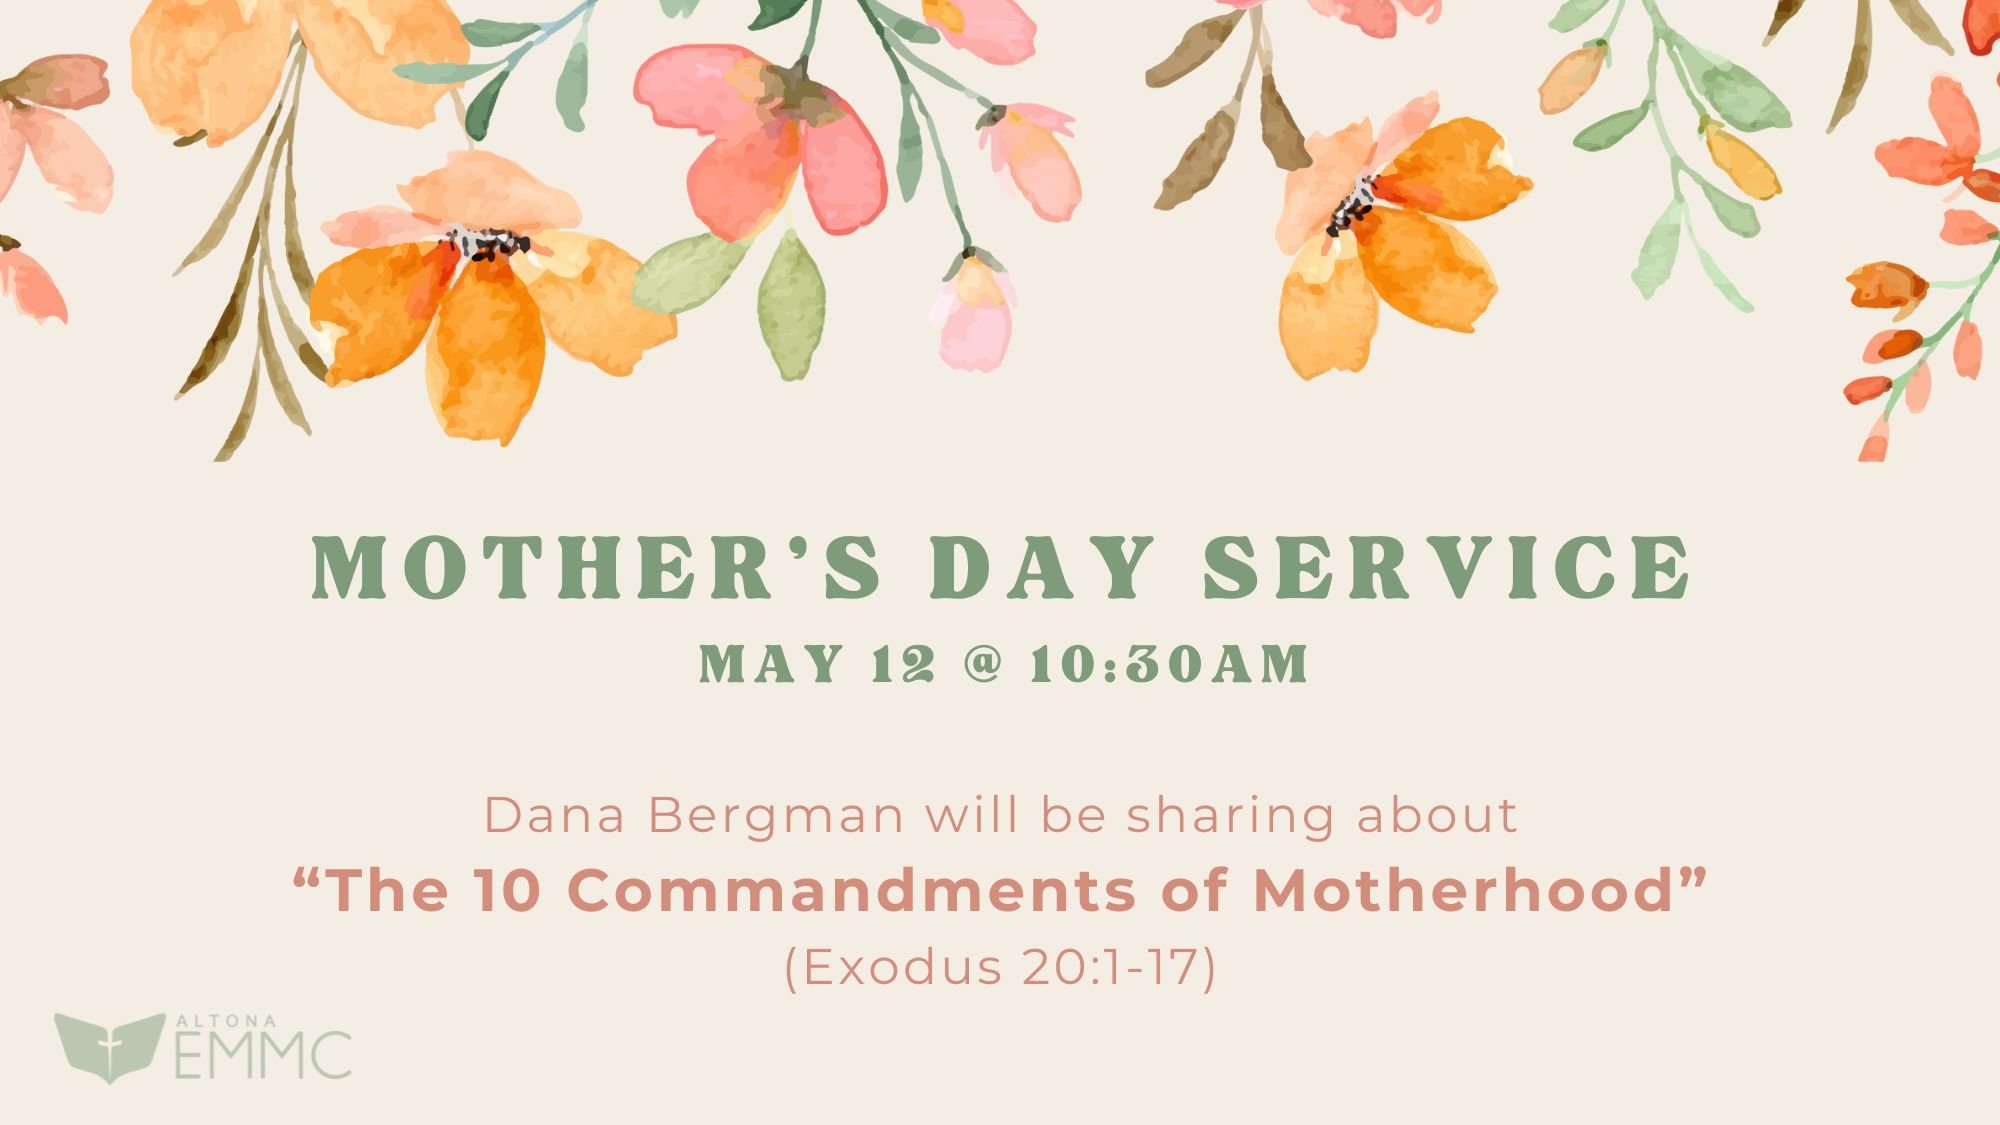 WEB - Mother's day service.jpg